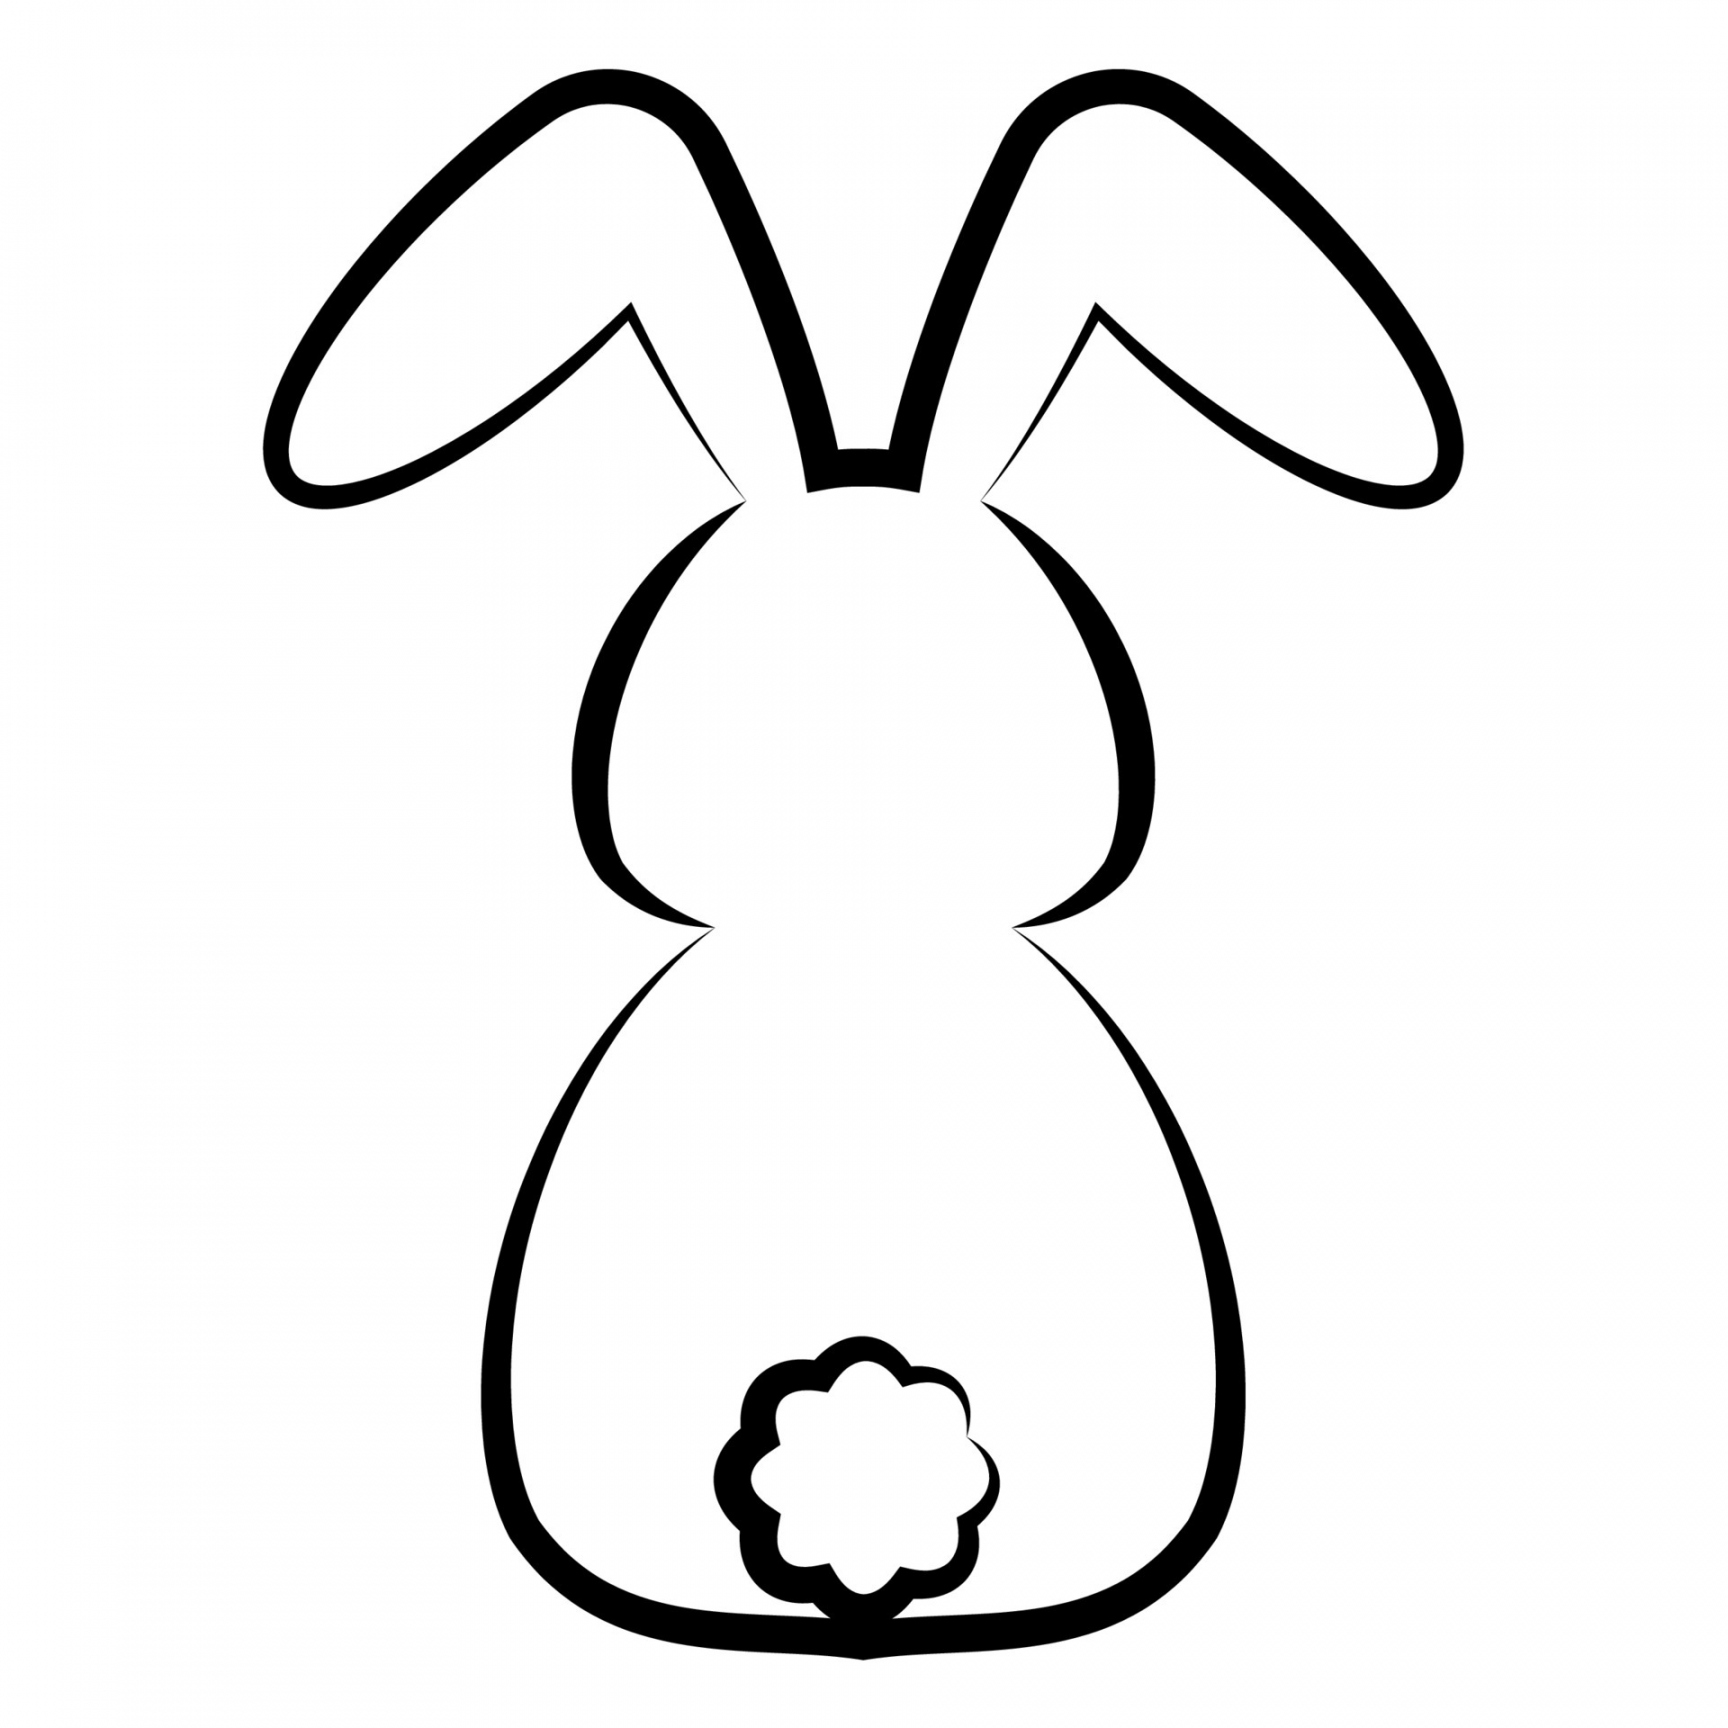 Bunny Outline Vector Art, Icons, and Graphics for Free Download - FREE Printables - Simple Bunny Outline